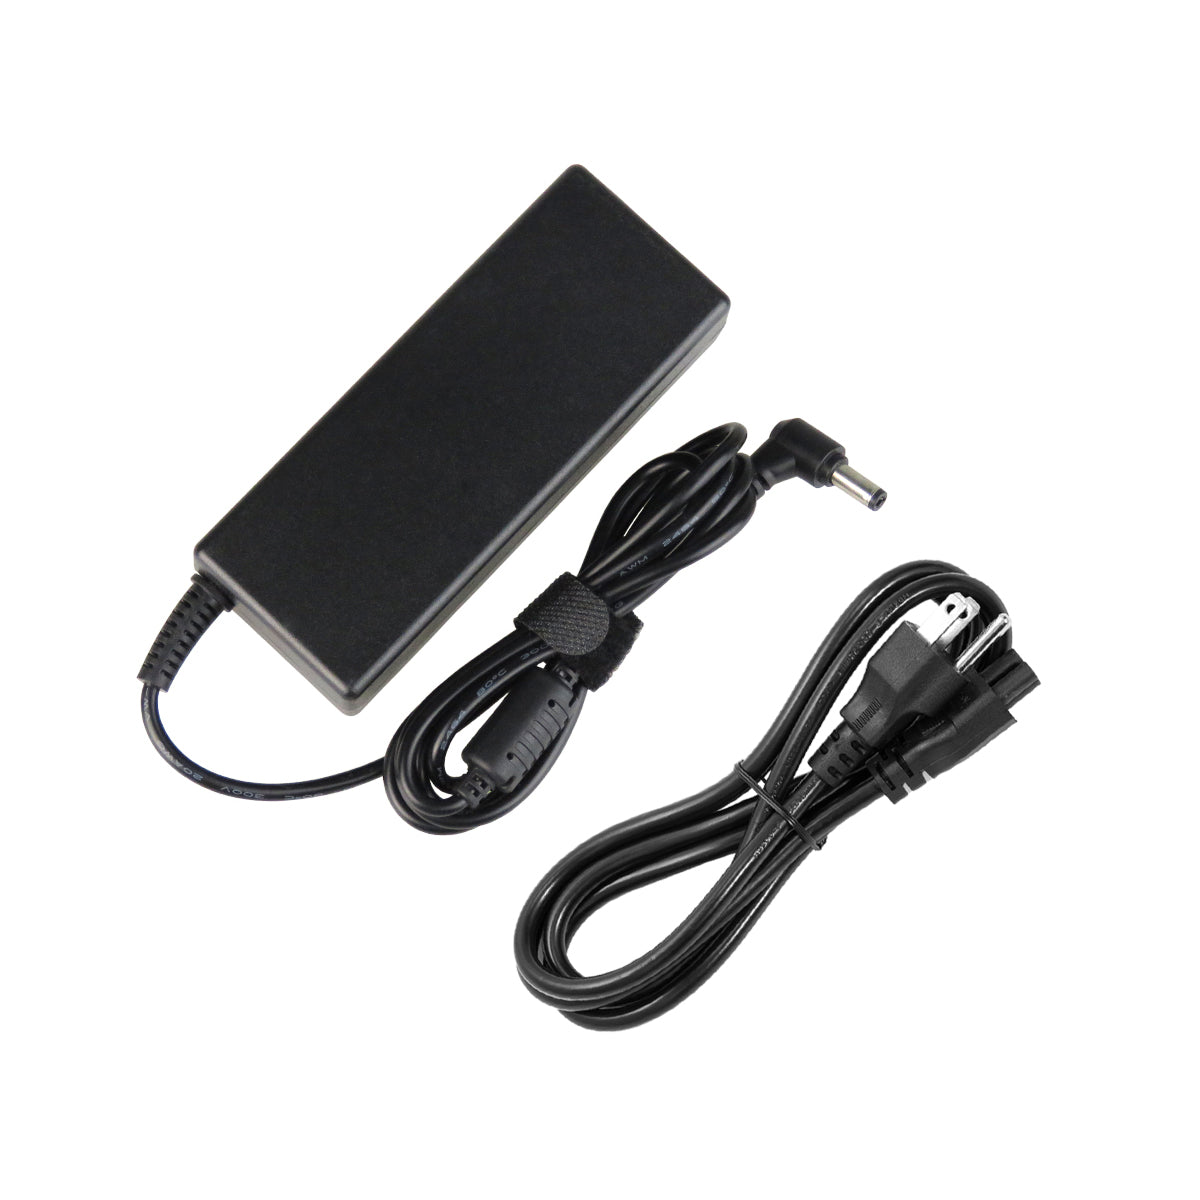 AC Adapter Charger for ASUS K53SV Notebook.